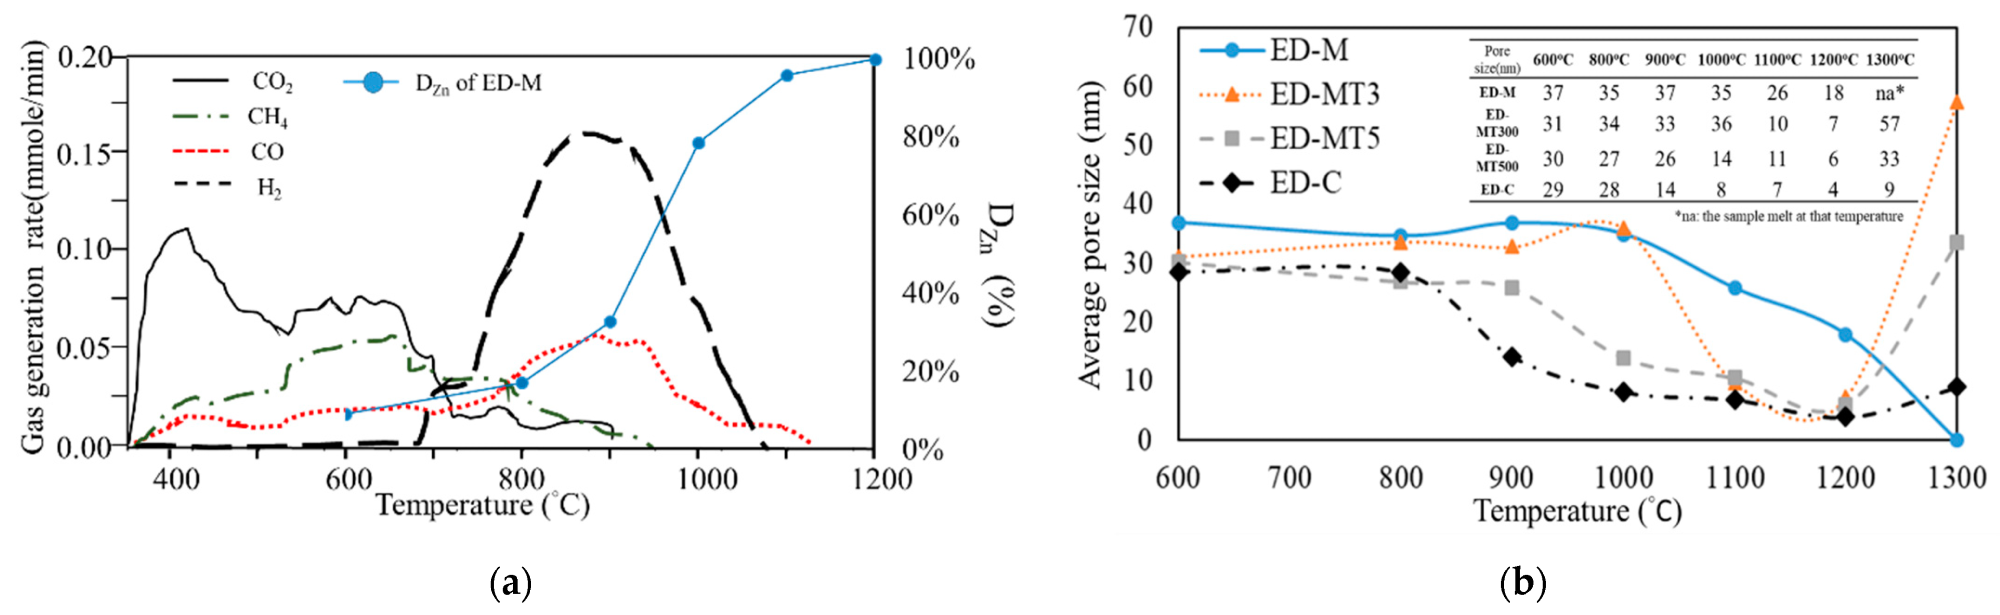 (a) Different types of gases vaporized or dissociated from volatile matter (VM) of SMS which was heated from 300 to 1200 °C at the rate of 20 °C/min in inert gas; for comparison, the degree of Zn removal (DZn, %) is also plotted. (b) Changes in mean pore size in the carbothermic reduction process from 600 °C to 1300 °C of samples with C/O ratio = 0.8.